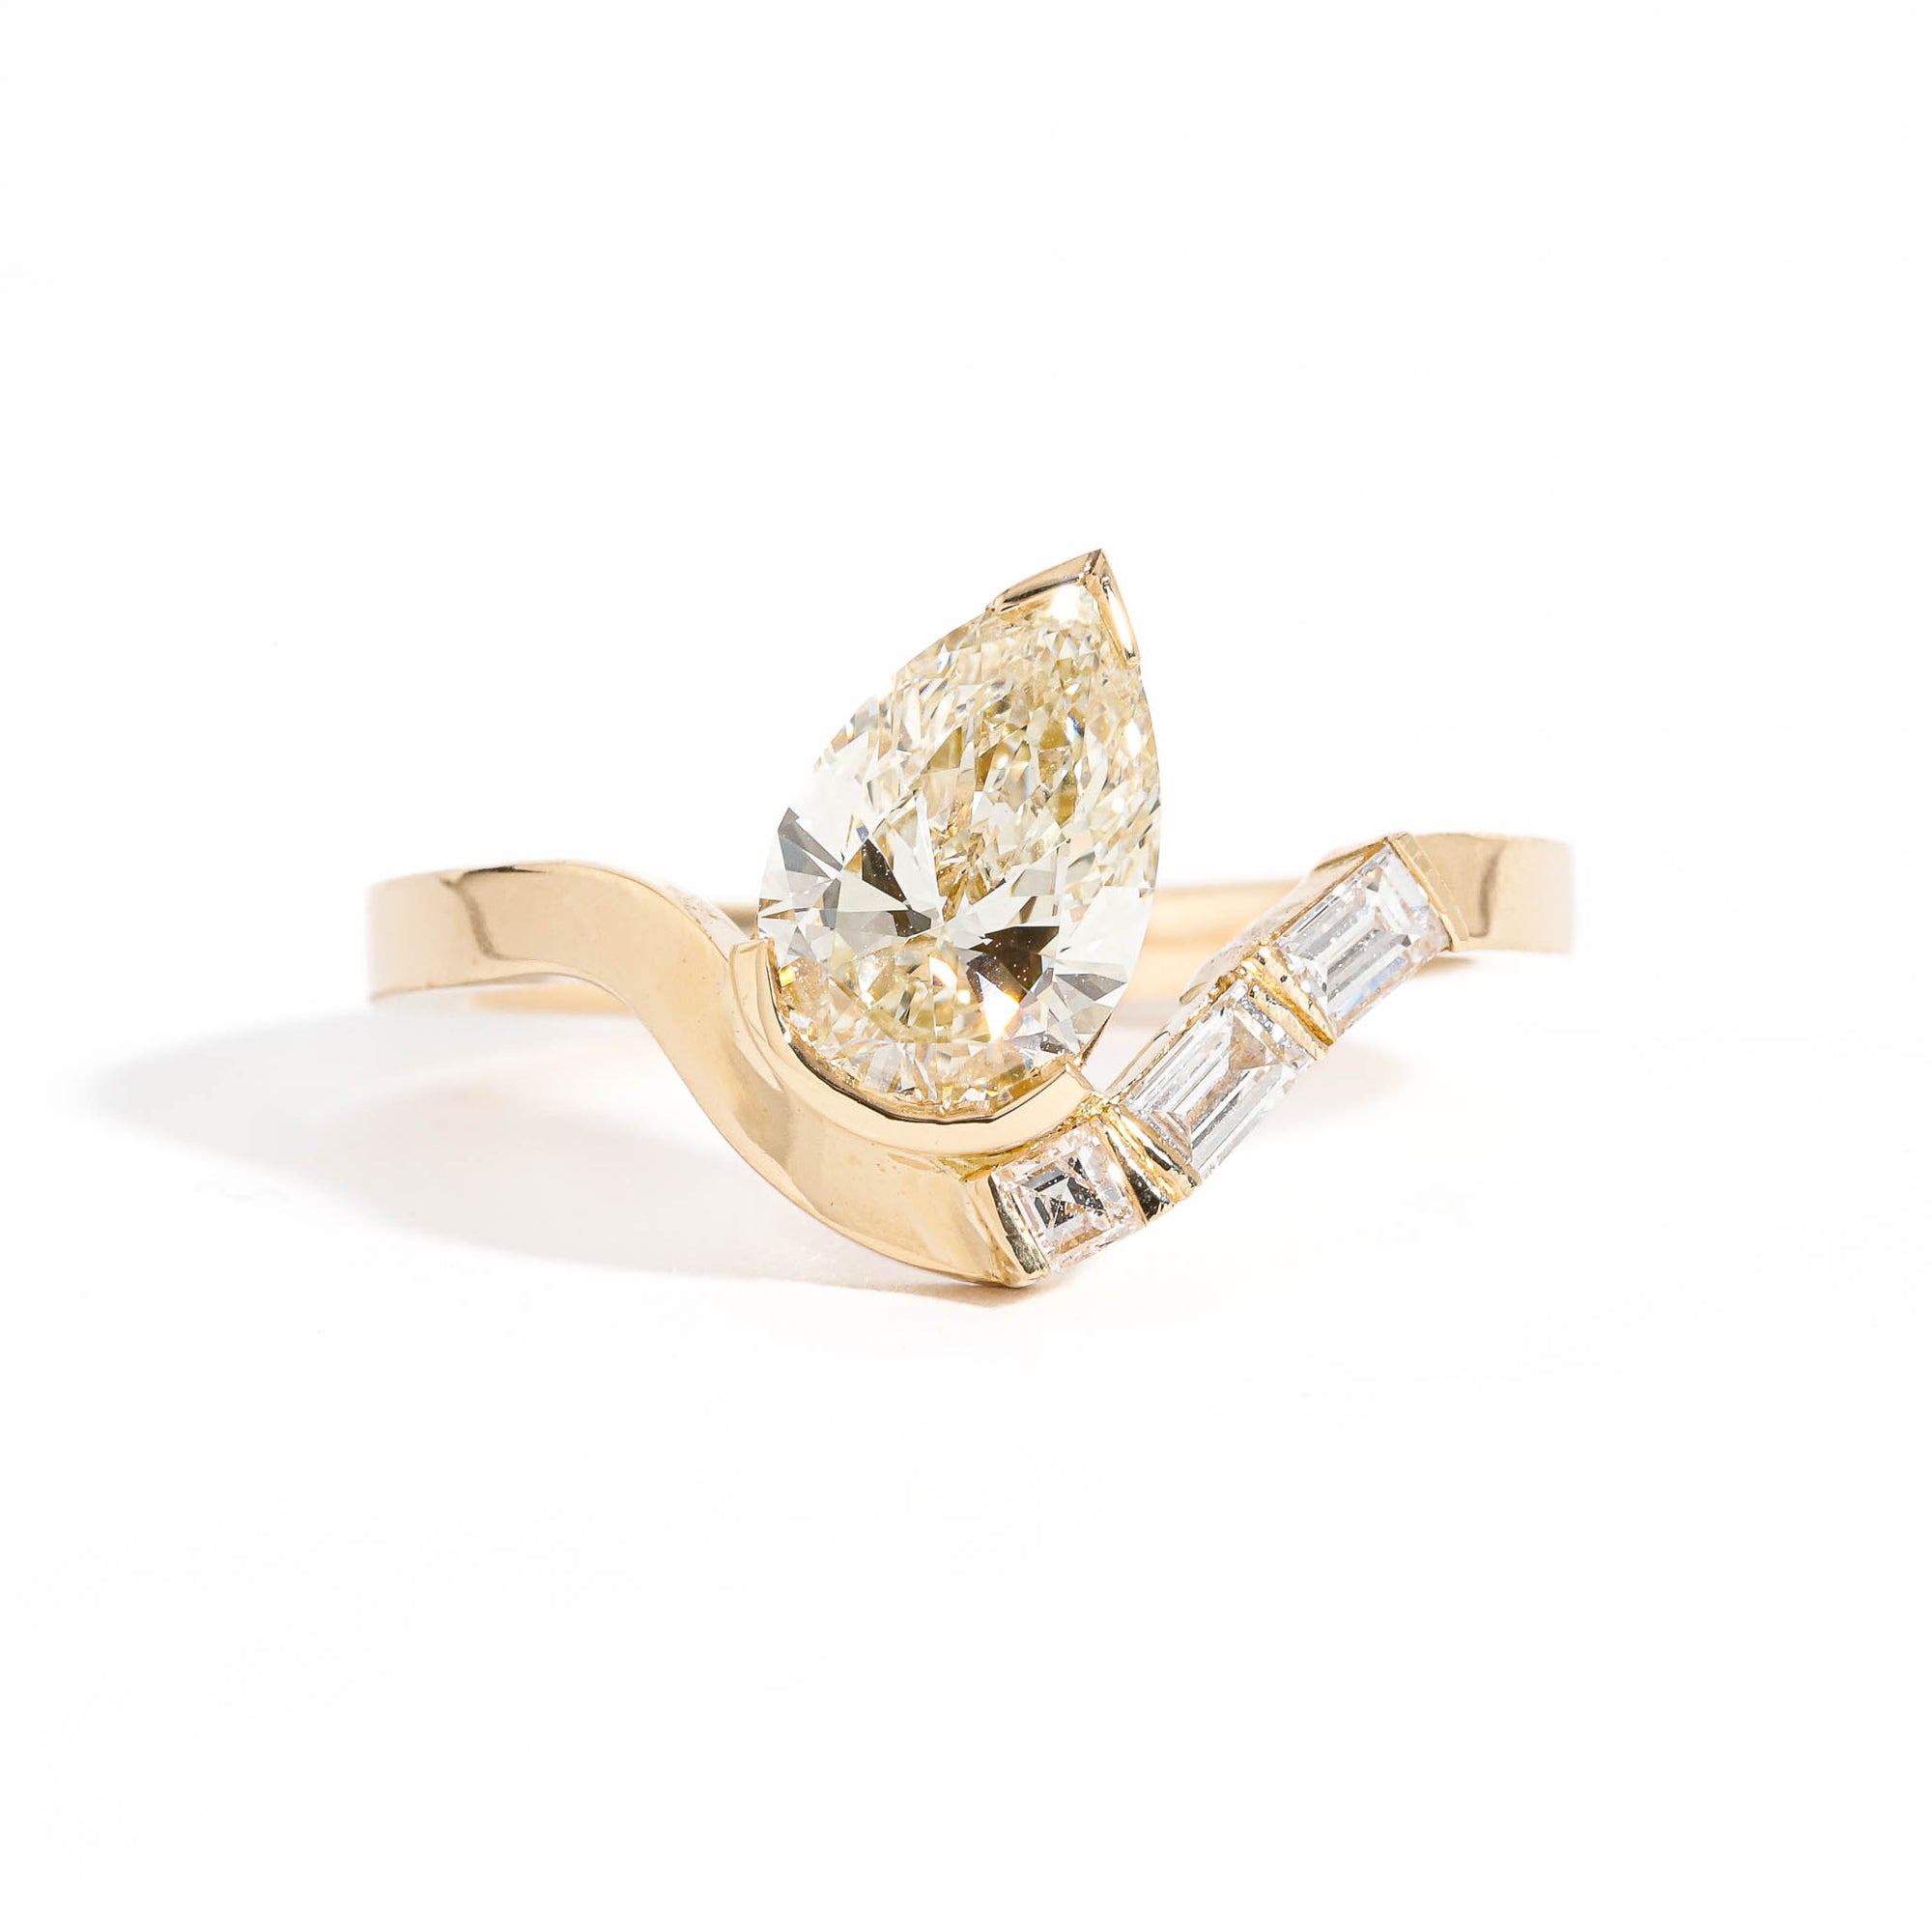  Pear Cut and Baguette Cut White Diamond Engagement Ring in 18 Carat Yellow Gold